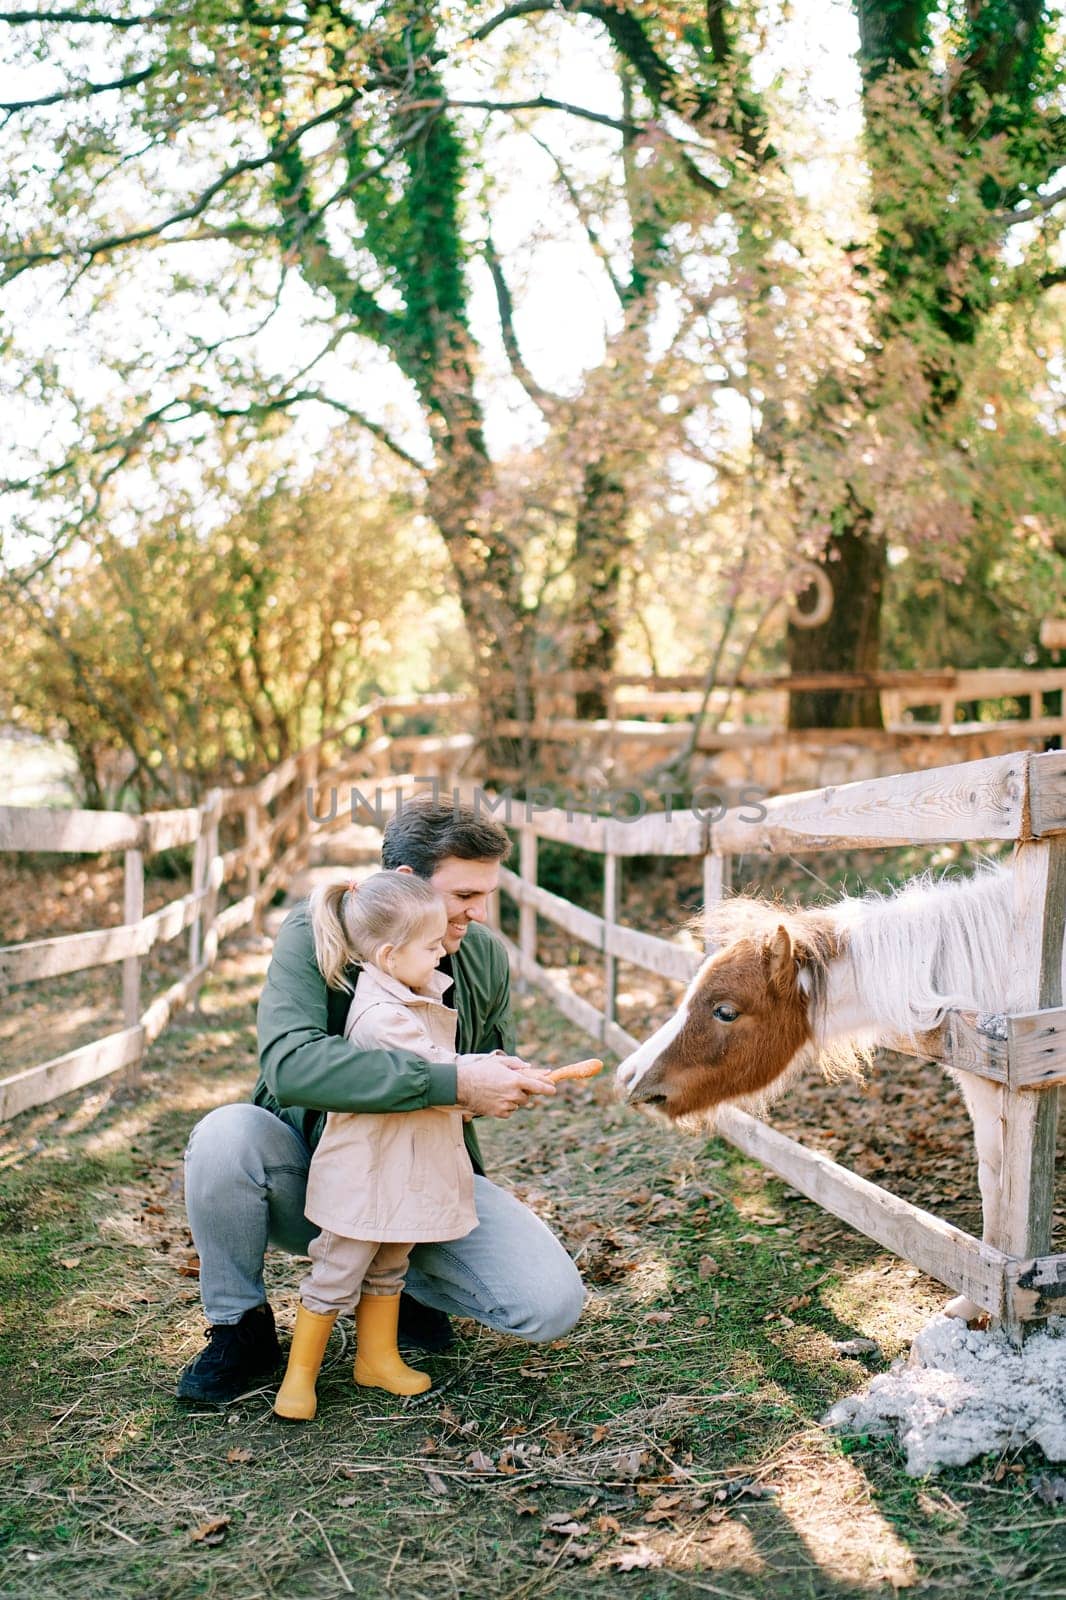 Little girl and her dad feed a pony poking its head out from behind a wooden fence. High quality photo